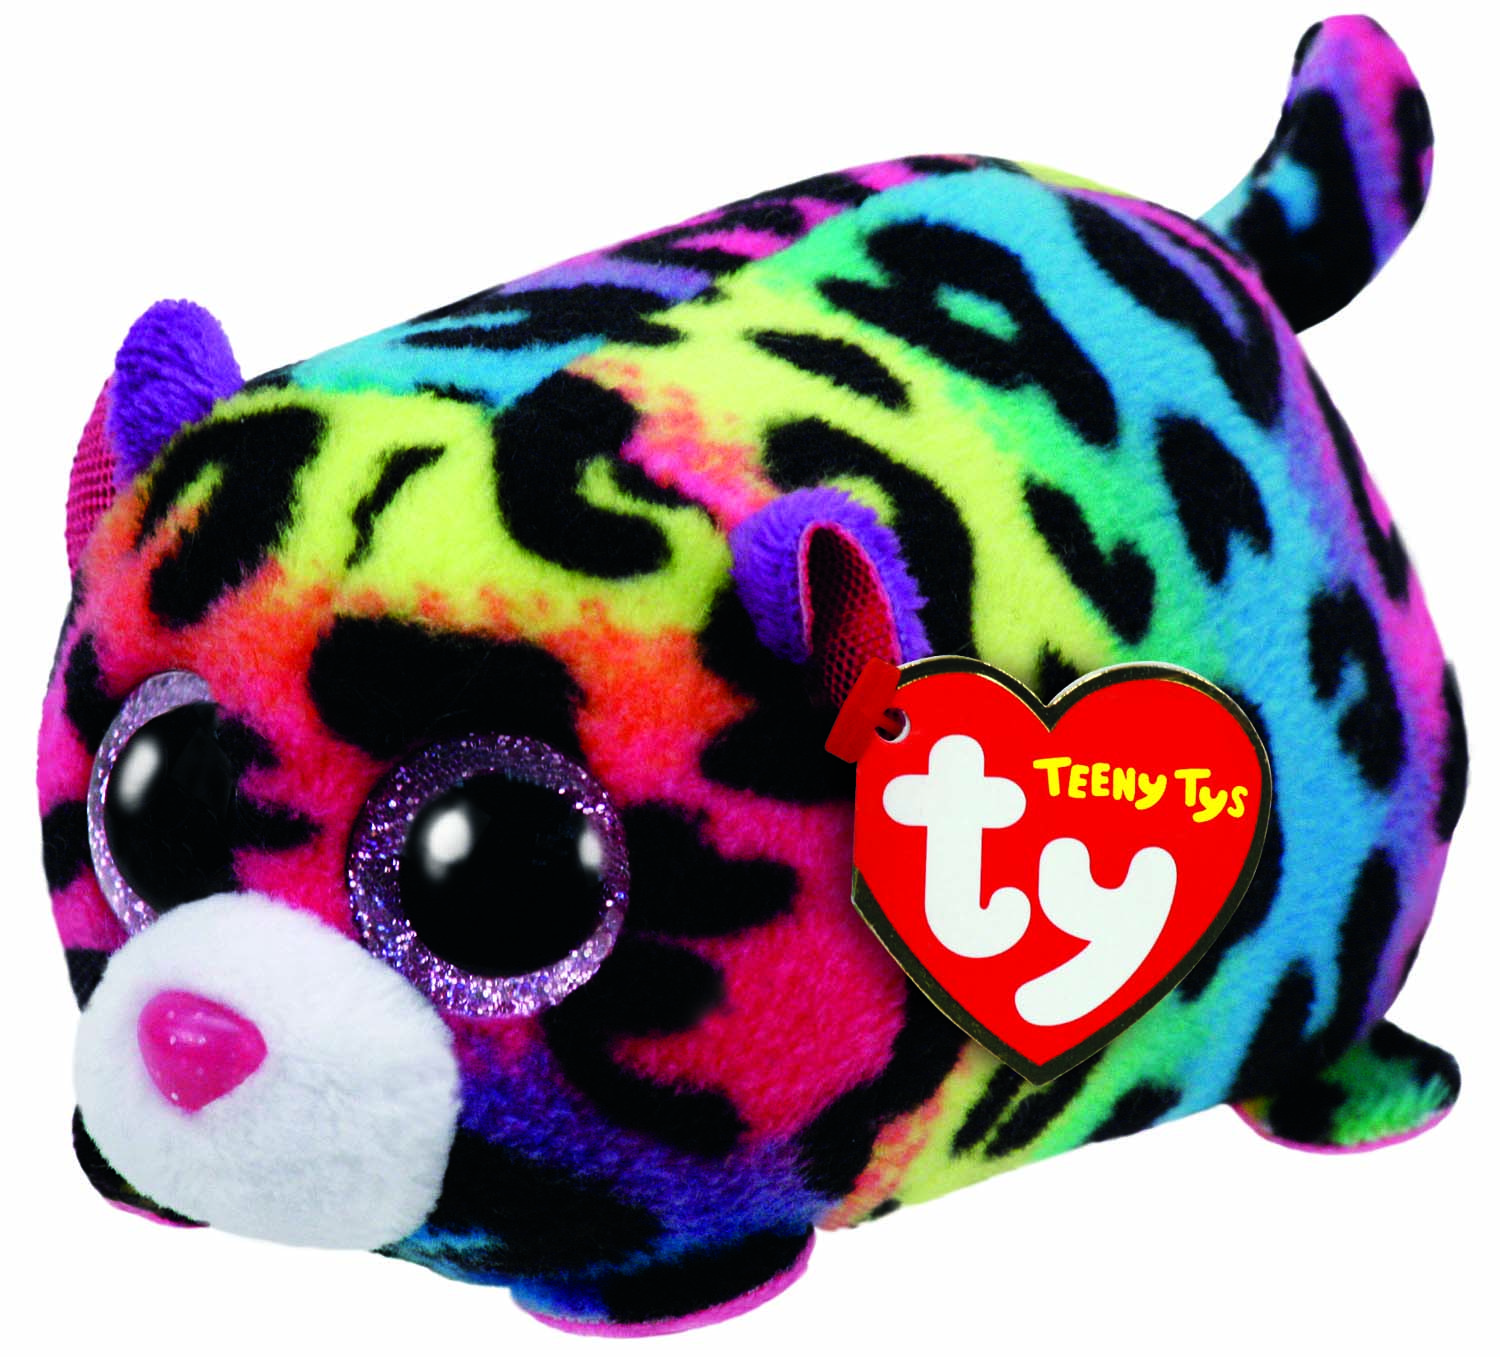 ZDISC Jelly the Leopard Teeny TY - Was £2.49 Now £1.99